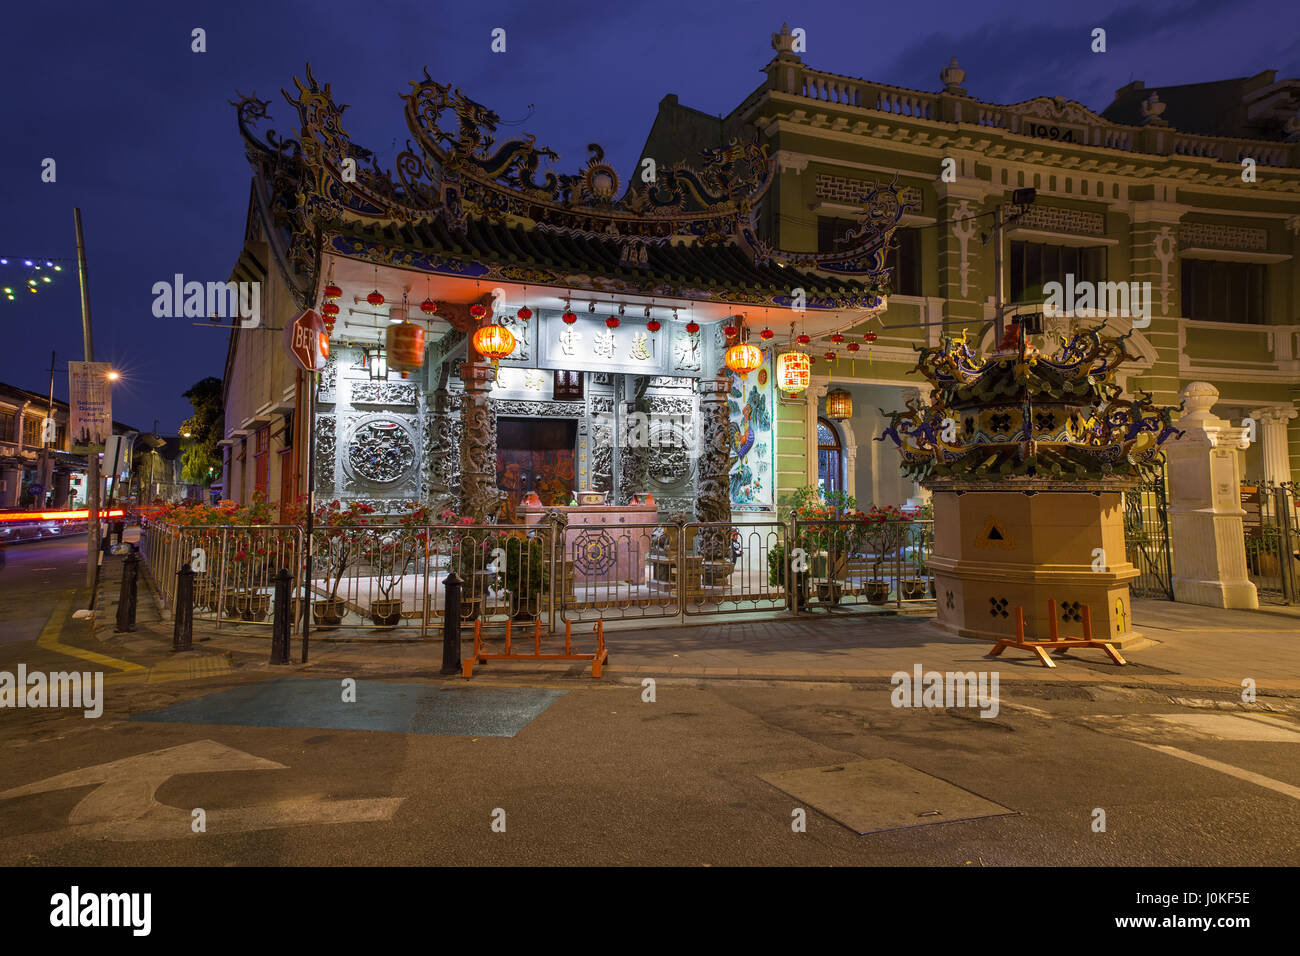 George Town, Penang - March 24, 2016: Dusk view of the Choo Chay Keong Temple adjoined to Yap Kongsi clan house, Armenian Street, George Town, Penang, Stock Photo